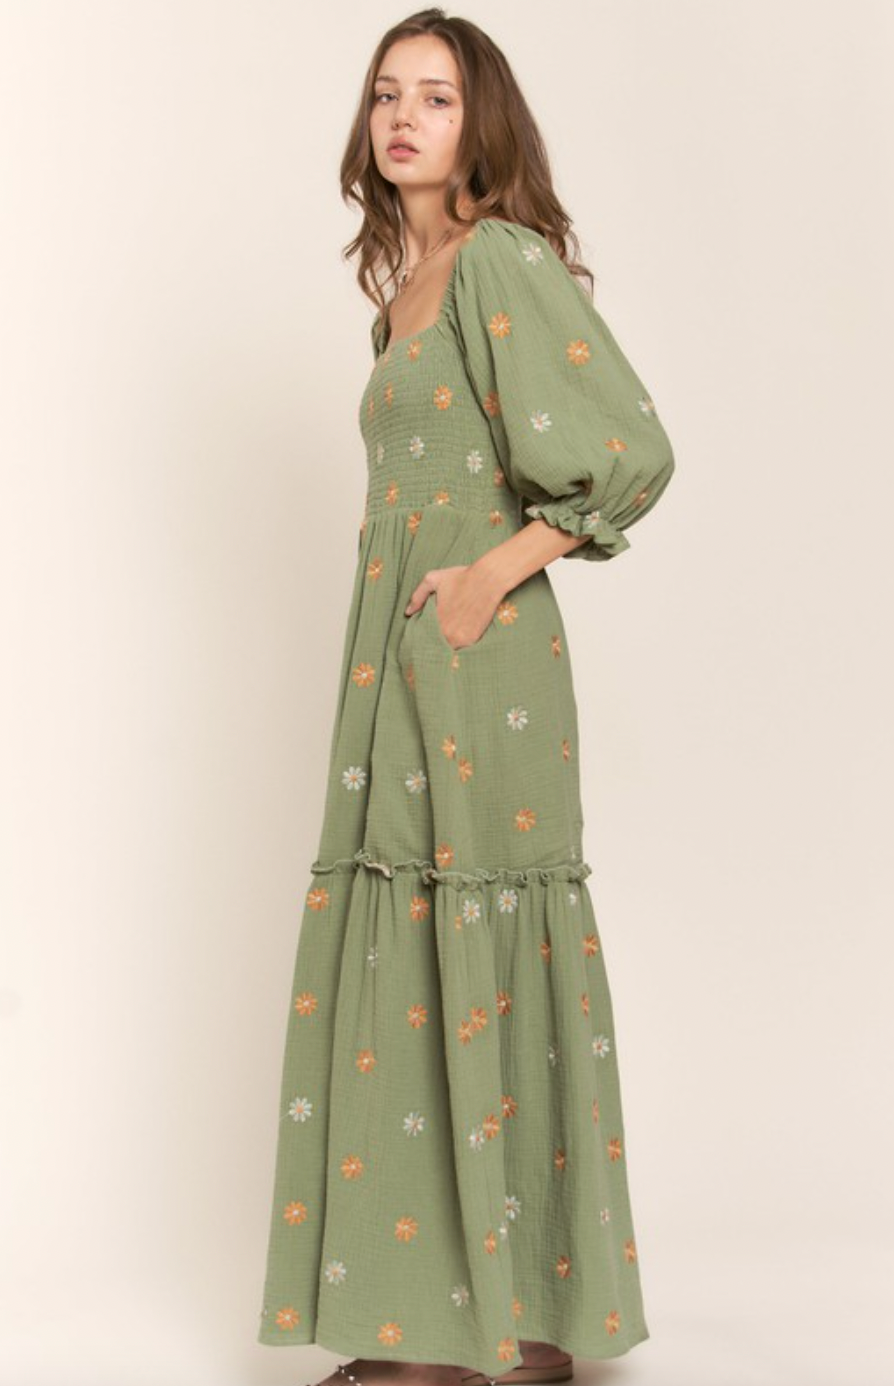 Cotton maxi dress with pockets